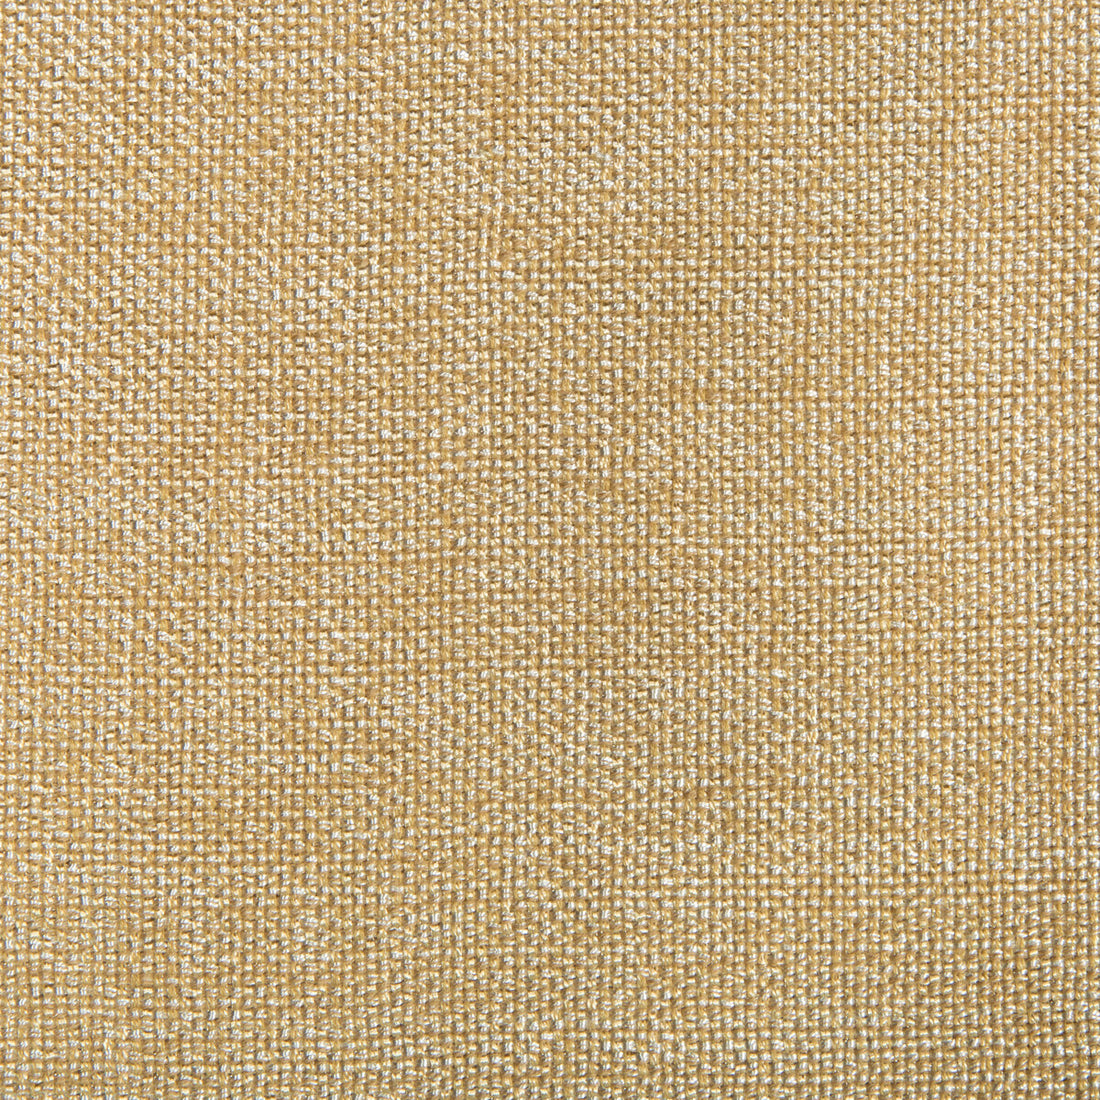 Kravet Contract fabric in 34926-116 color - pattern 34926.116.0 - by Kravet Contract